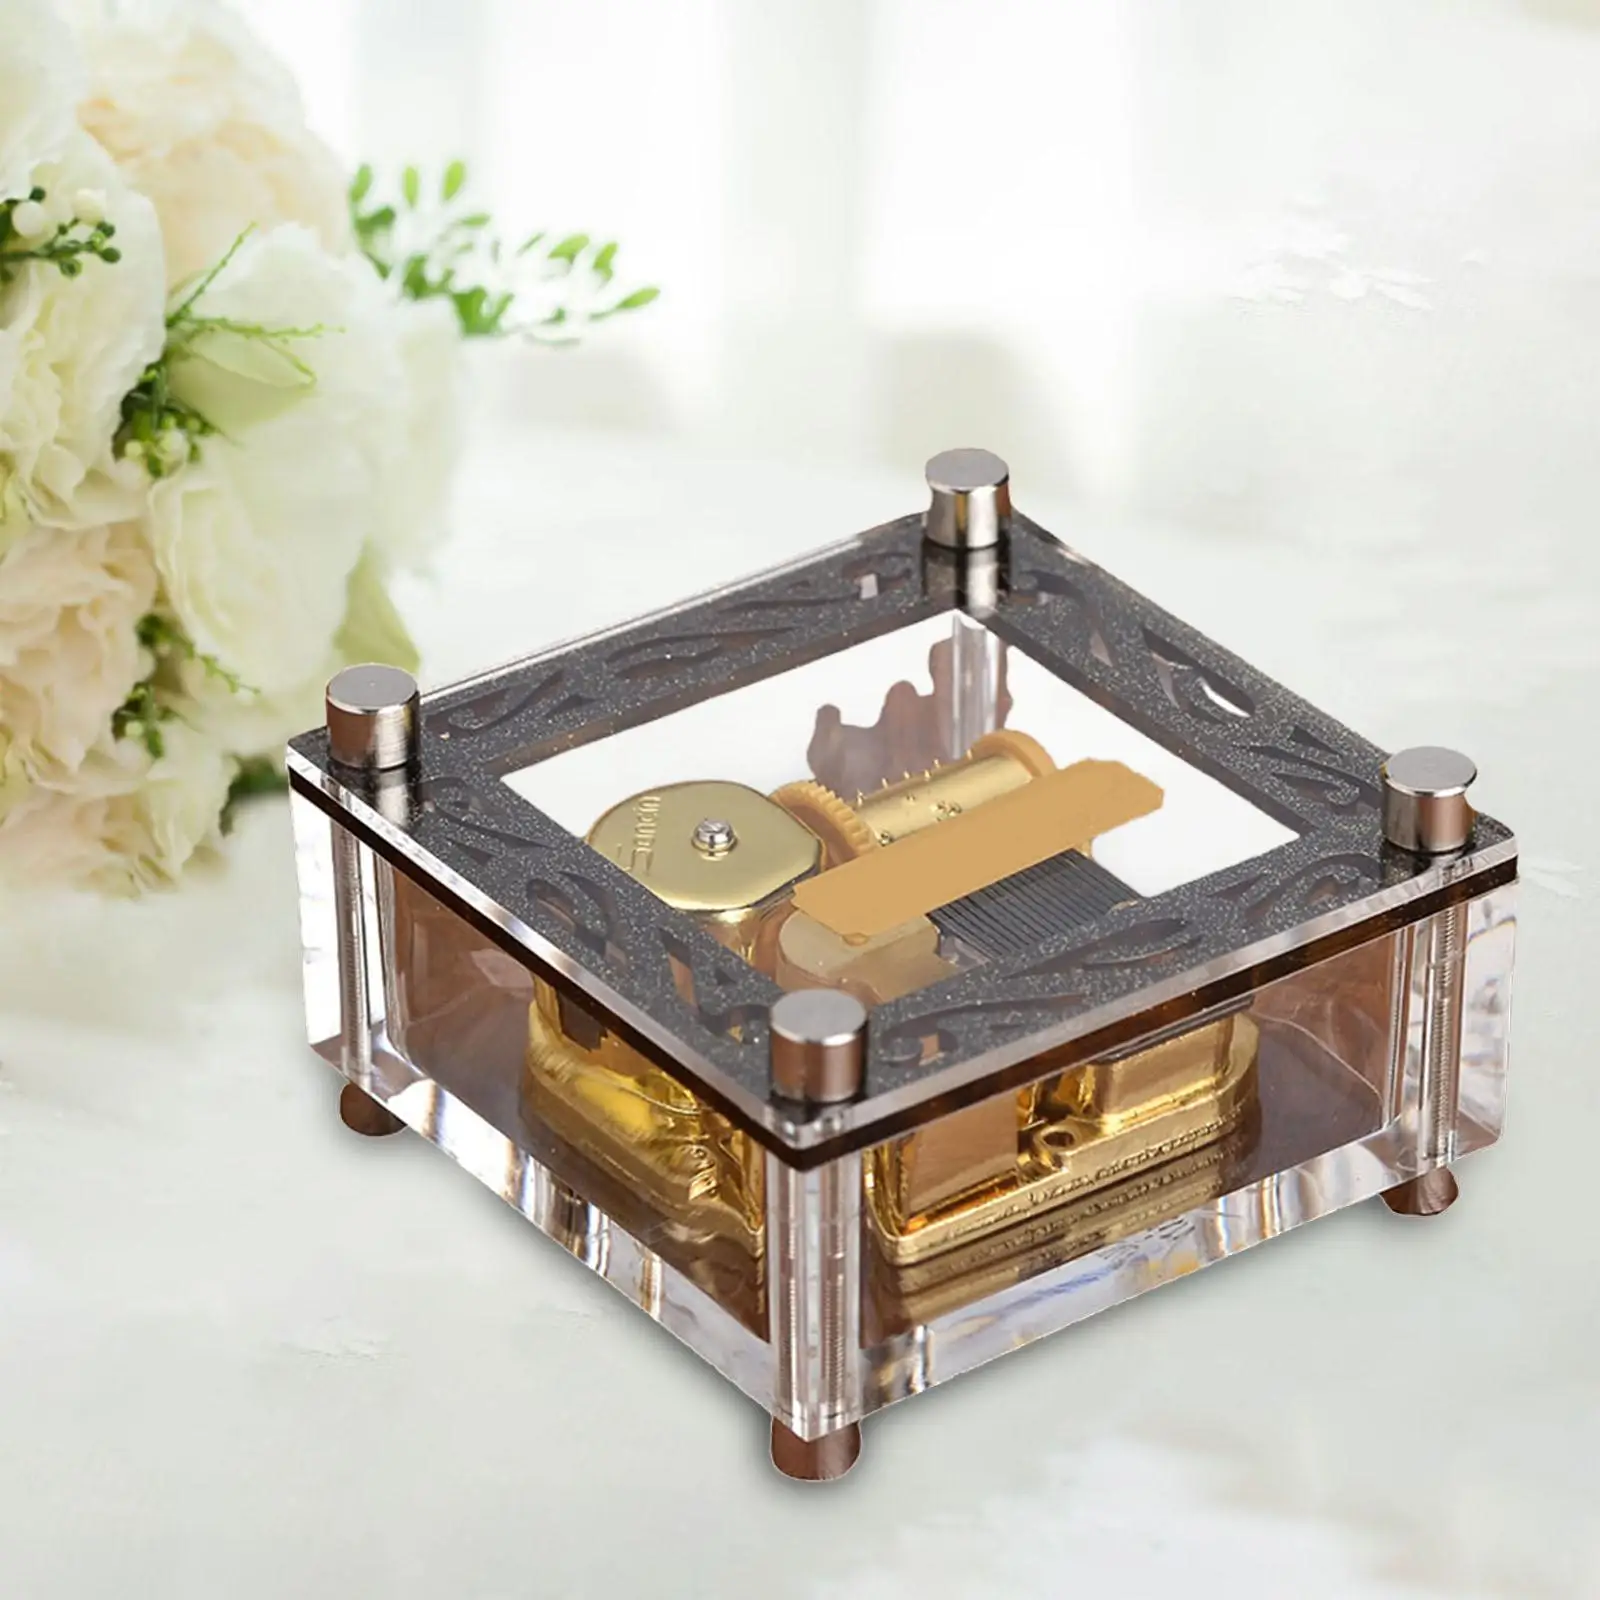 Unique Music Box Acrylic Clear Durable Mechanism Portable Fashion for Birthday Gift Christmas Day Wedding Friends Teen Adults